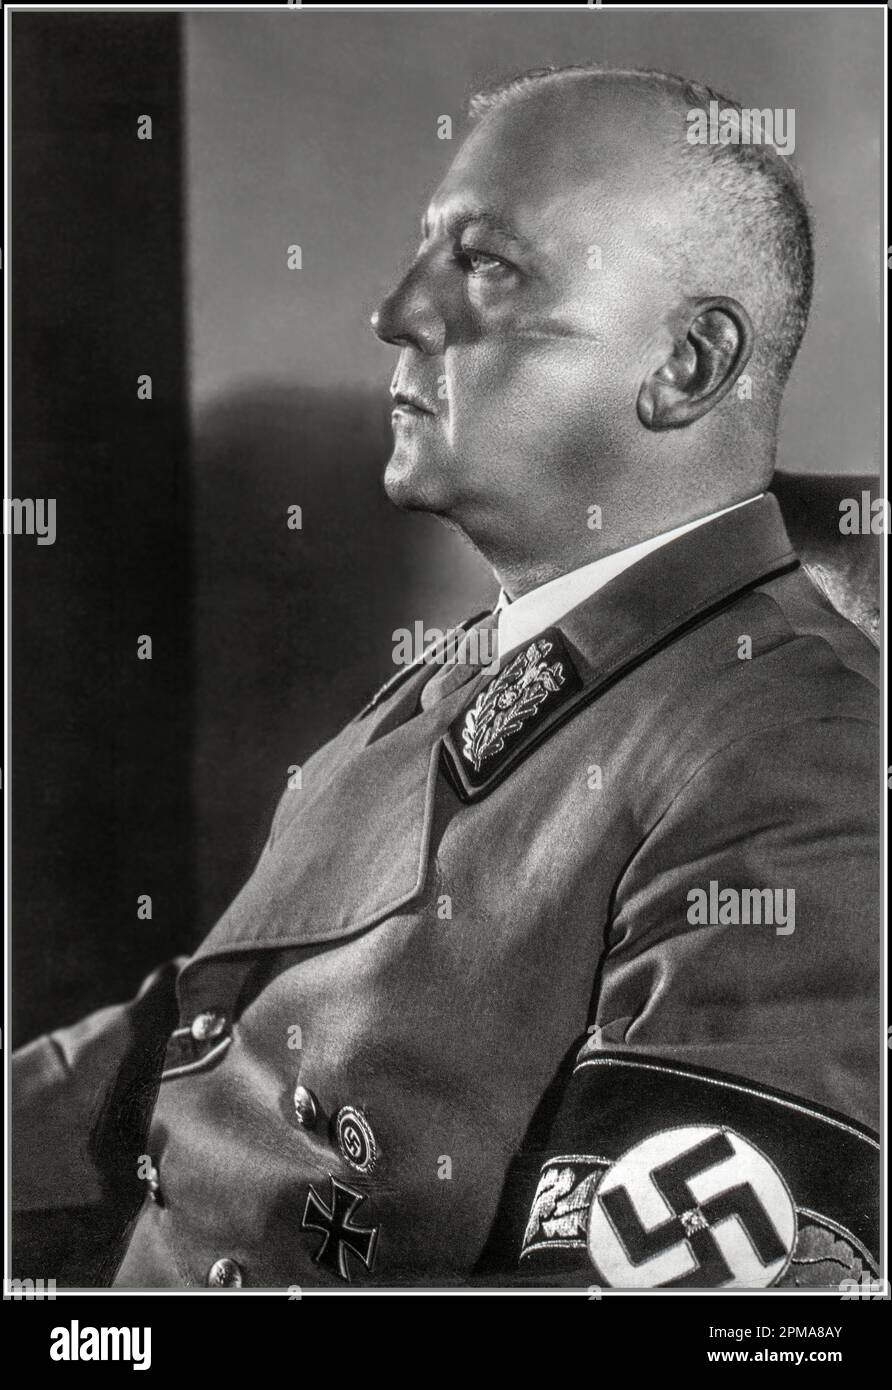 Adolf Wagner portrait Gauleiter in Munich, the headquarters of the Nazi Party, from 1 November 1929. Though incapacitated by a stroke in June 1942, he remained titular Gauleiter until his death on 12 April 1944. Stock Photo